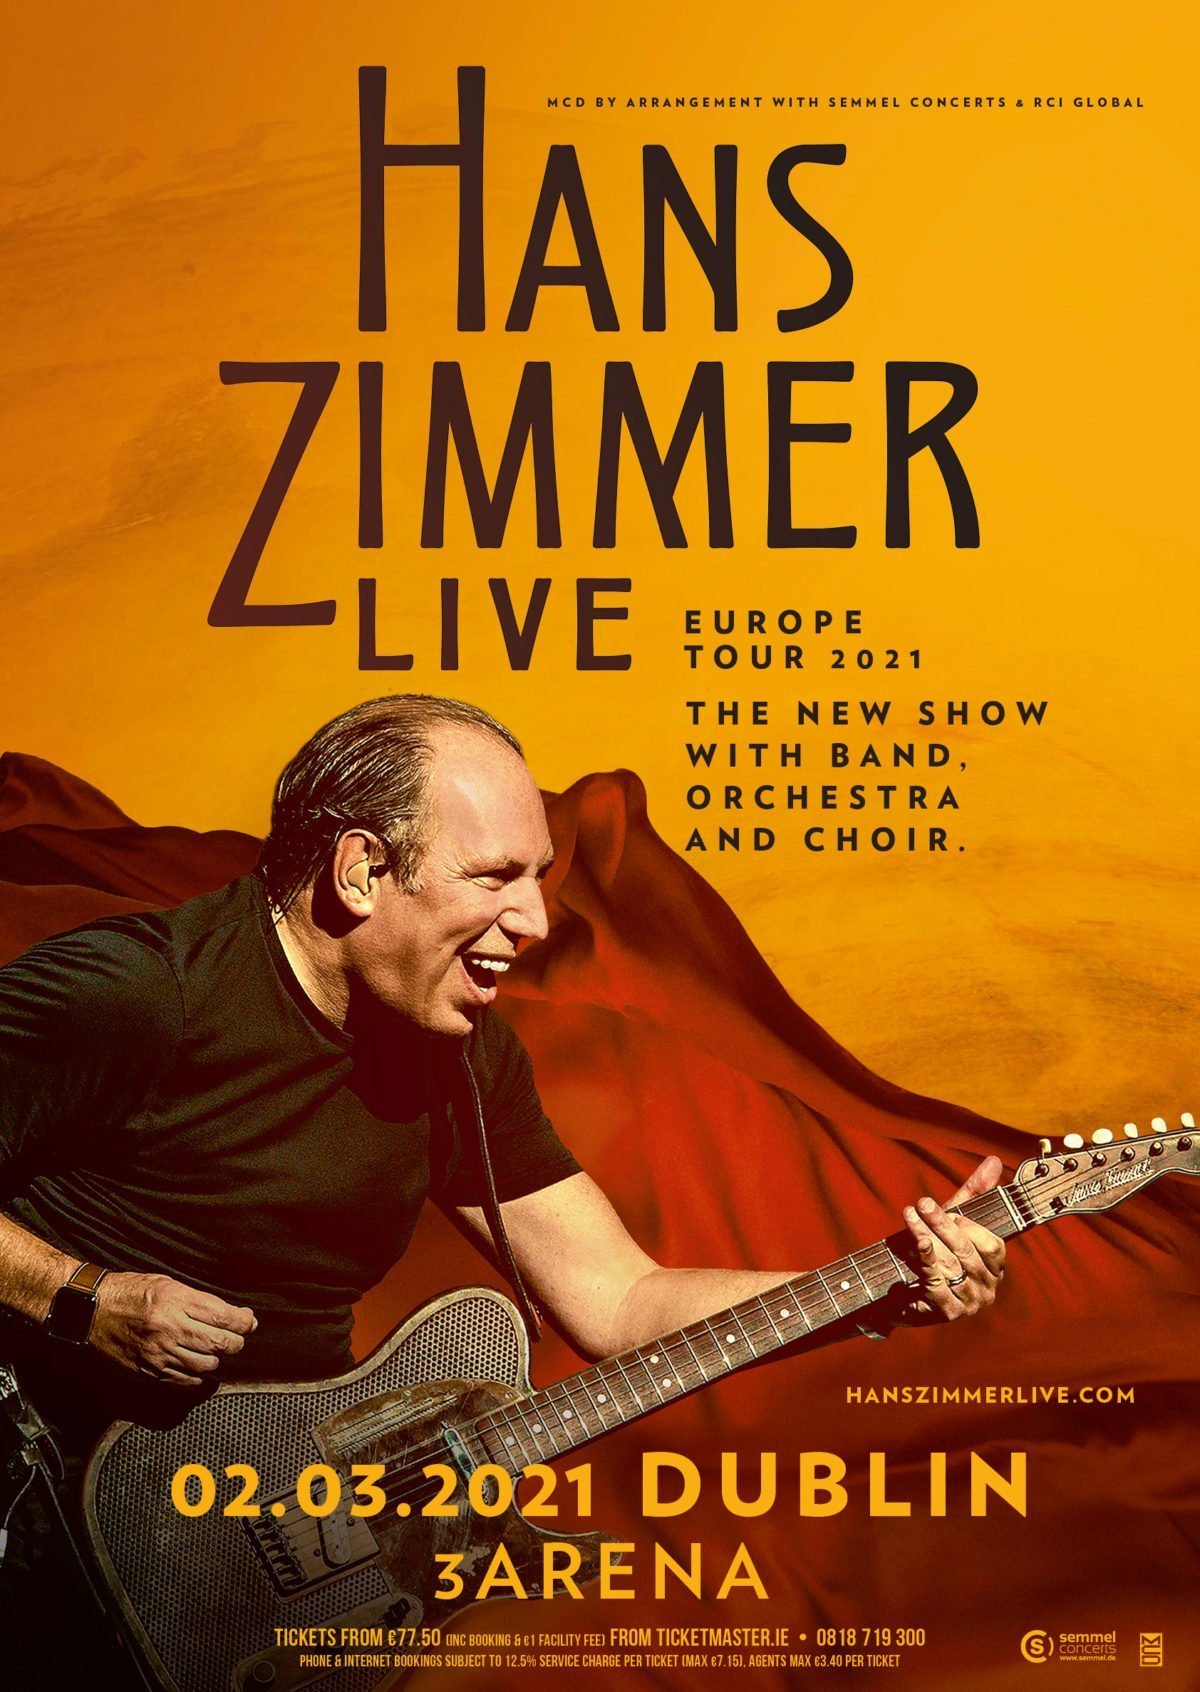 HANS ZIMMER Returns To 3Arena, Dublin On 2nd March 2021 With A Major